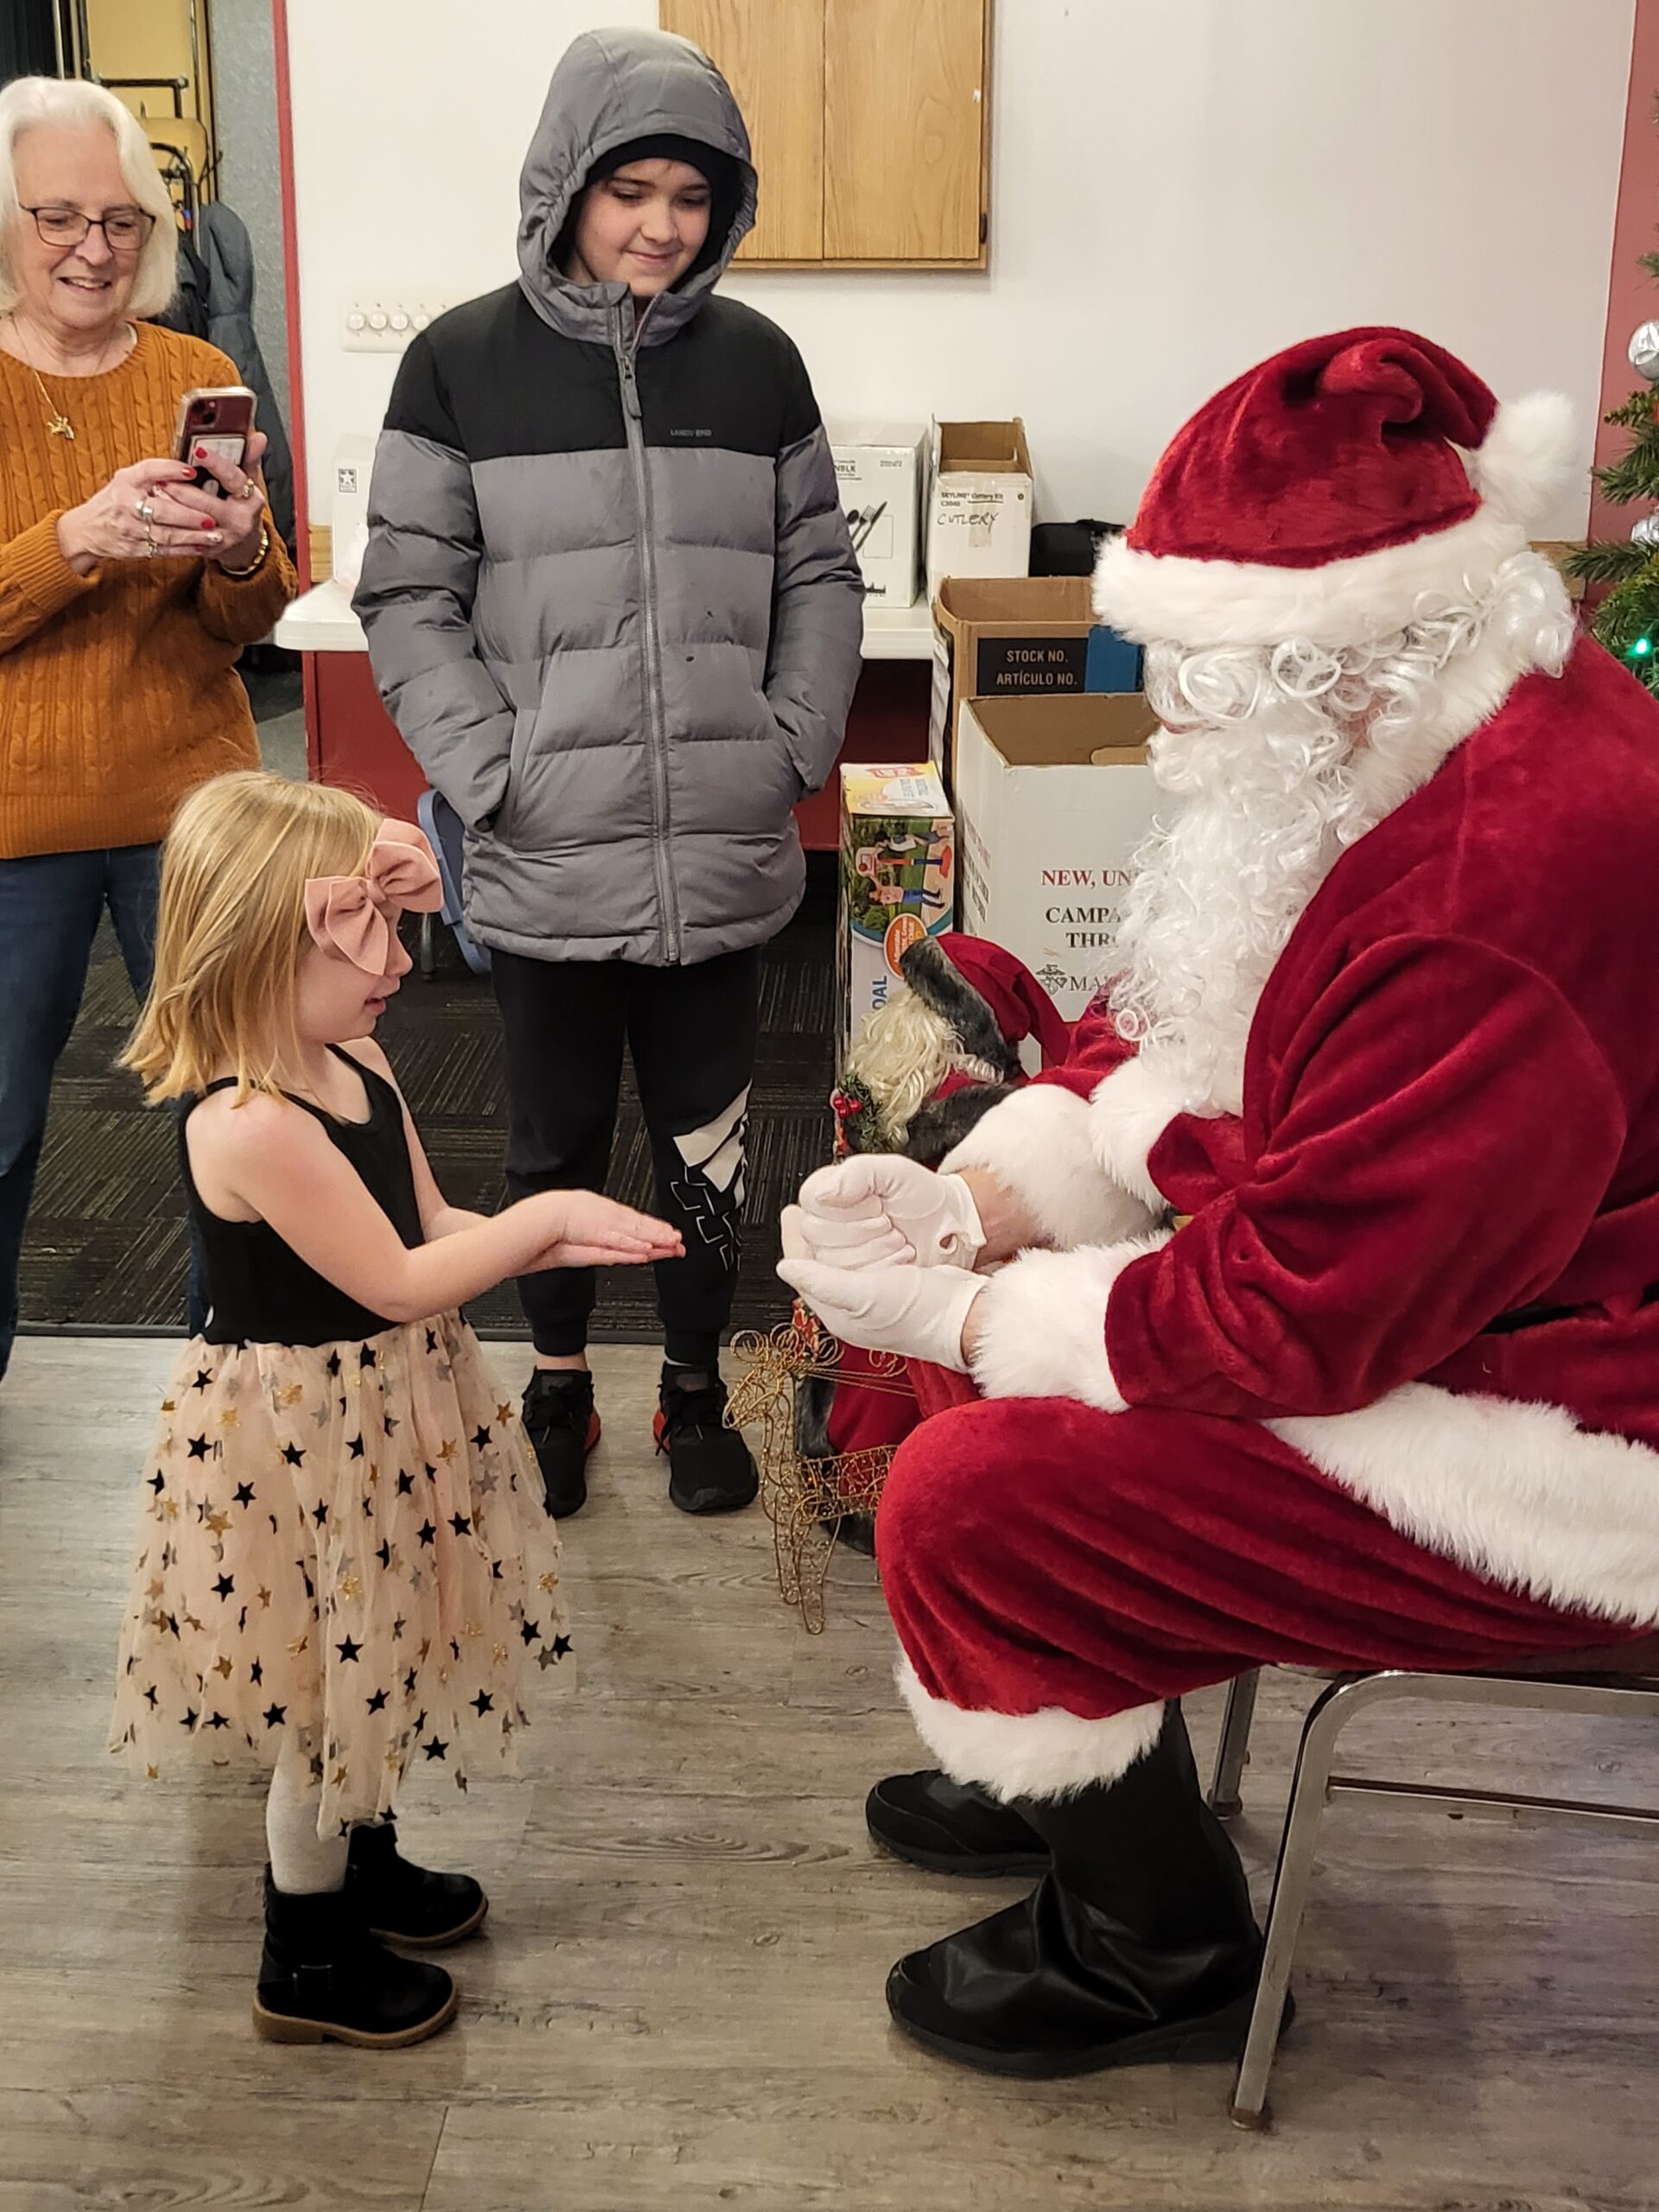 Young sweetie plays rock, paper scissors with Santa!